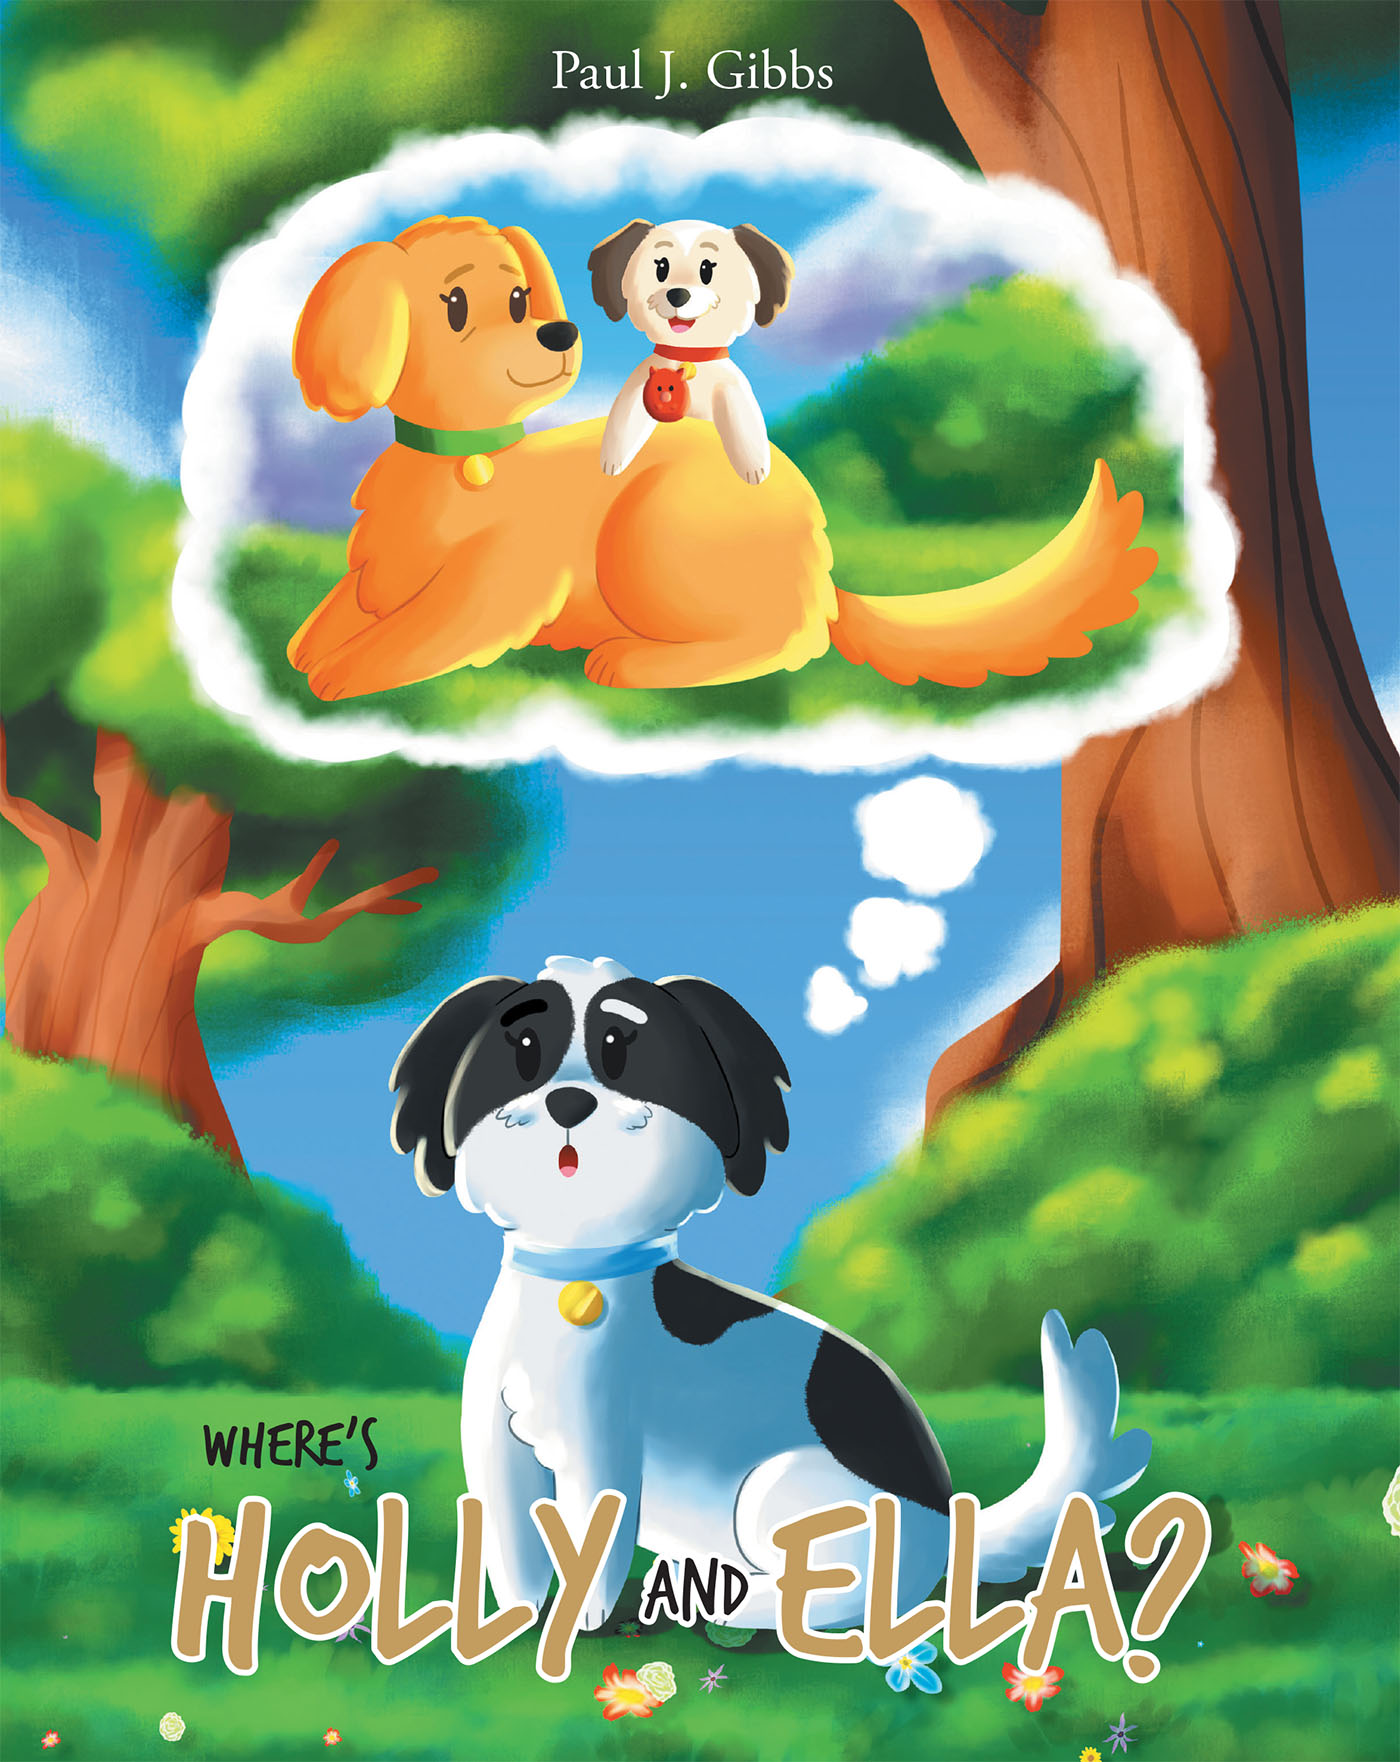 Author Paul J. Gibbs’s New Book, "Where's Holly and Ella?" is a Profound Story of What a Dog Experiences When One of Their Dog Companions Passes on to a Better Place